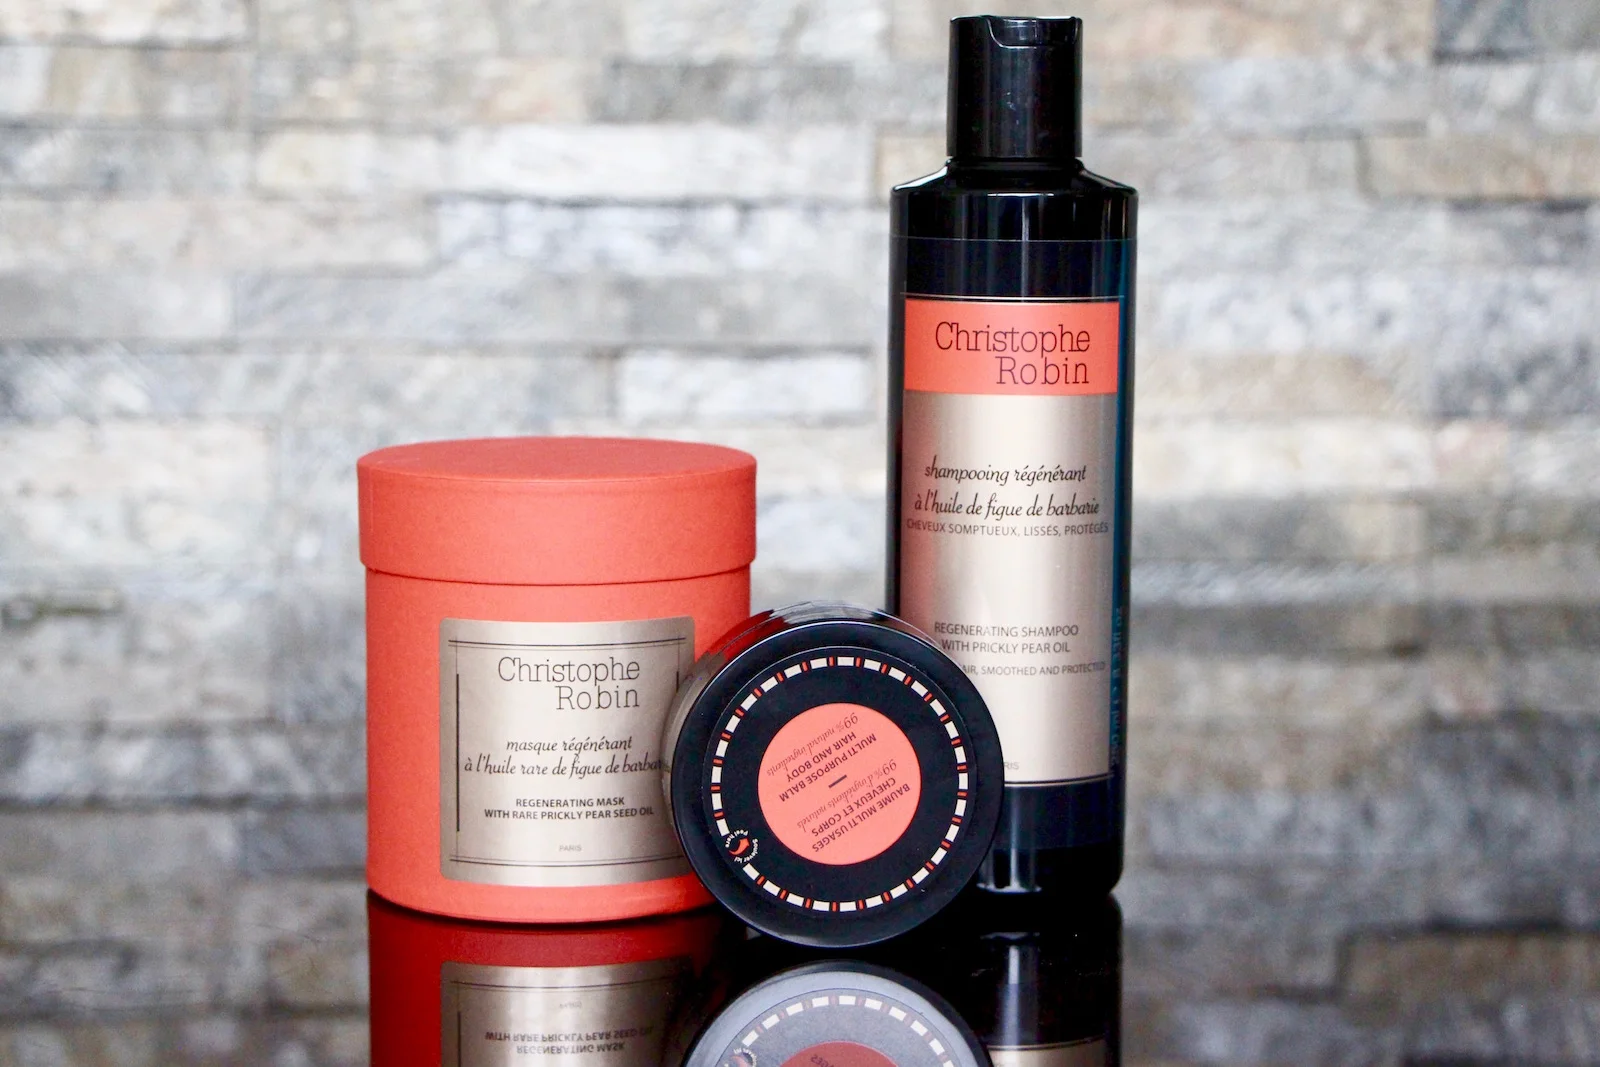 Giveaway: Christophe Robin Luxury Regenerating Haircare